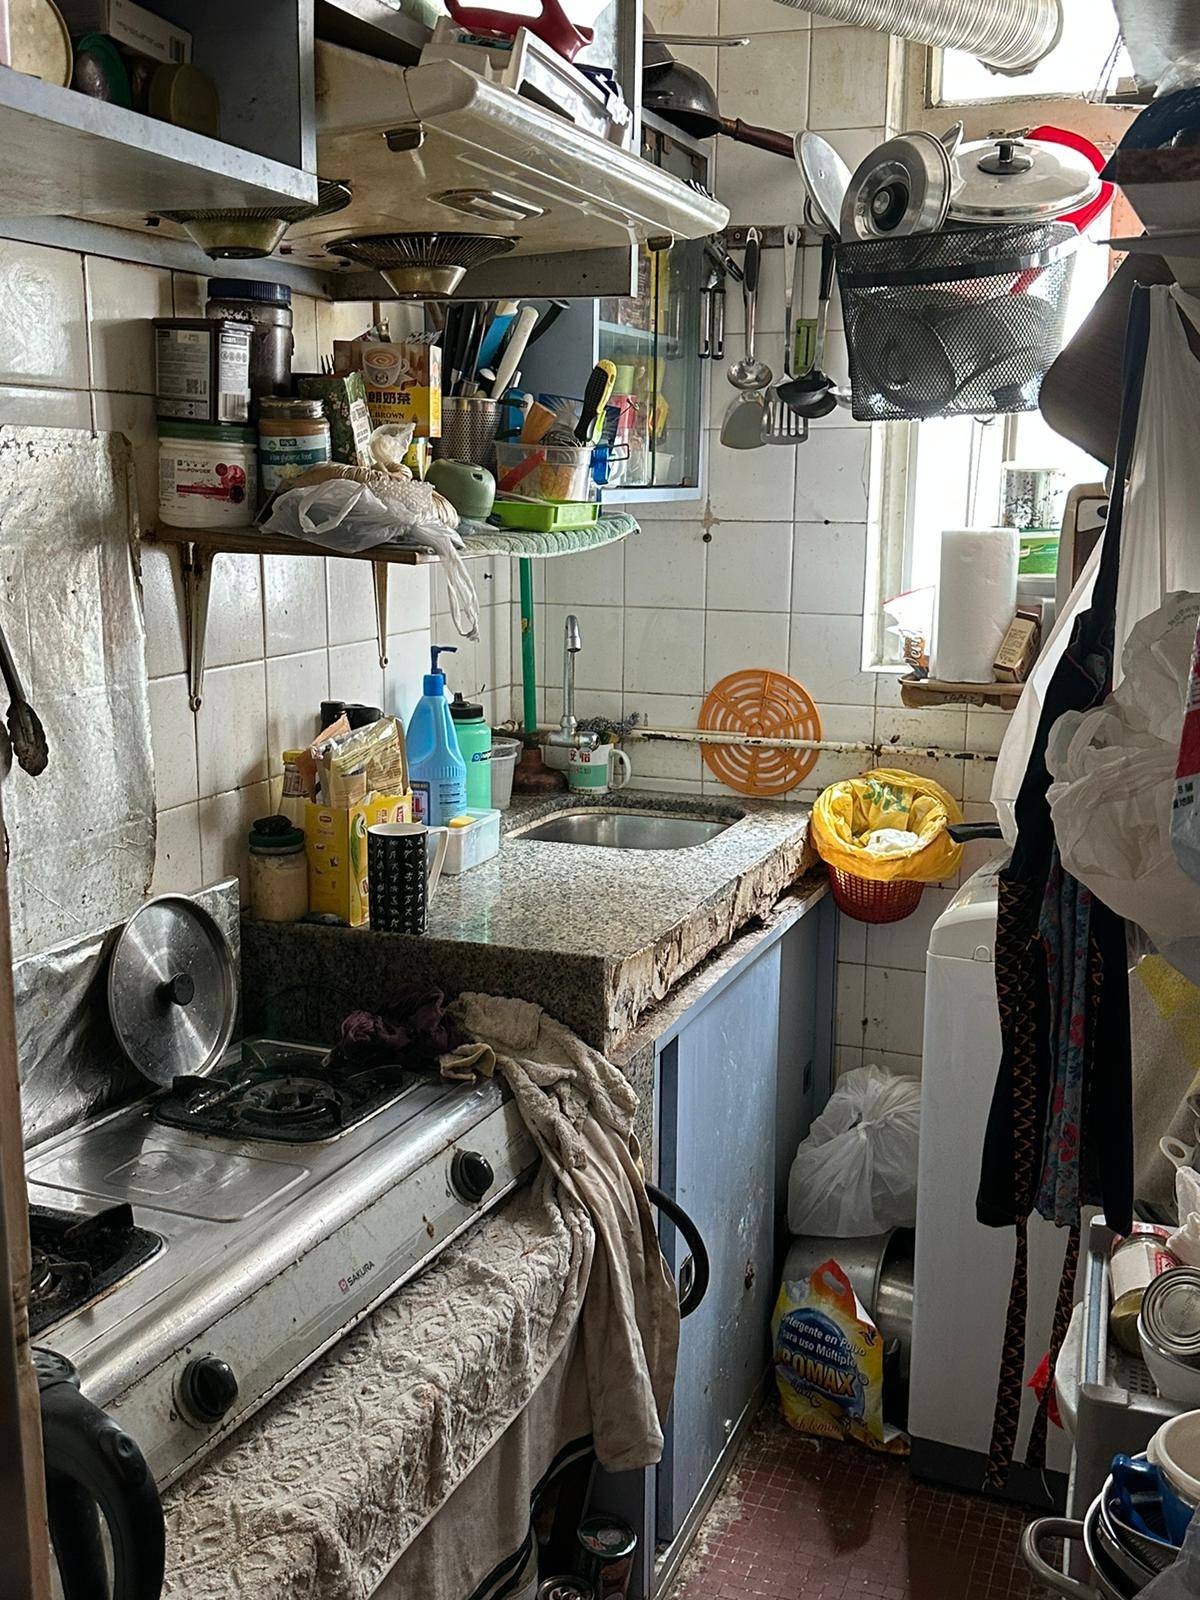 Living conditions of refugees in Hong Kong are often cramped and unsafe.